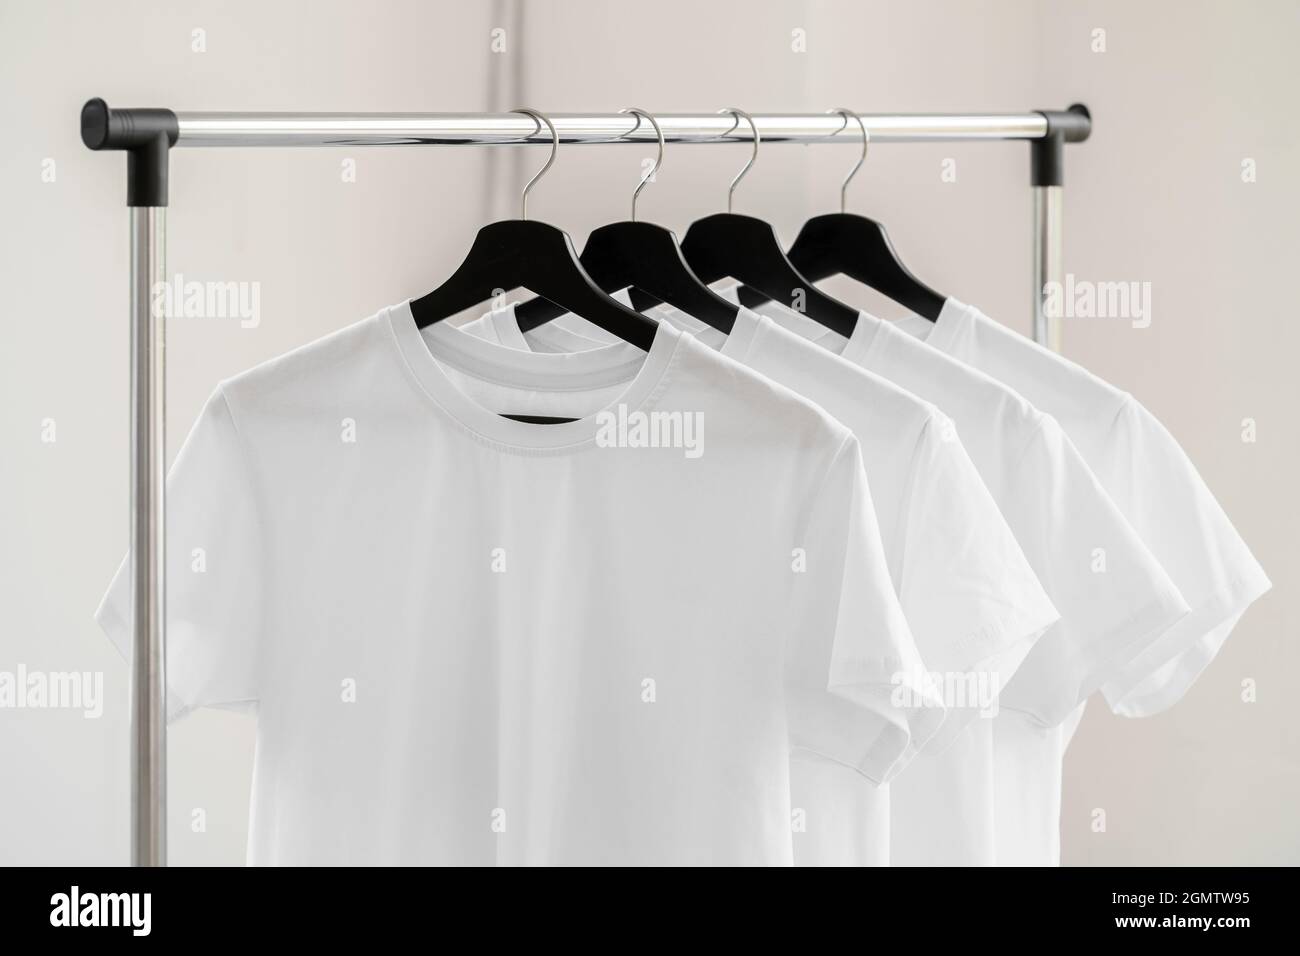 Row of white t-shirts on hangers on rack Stock Photo - Alamy